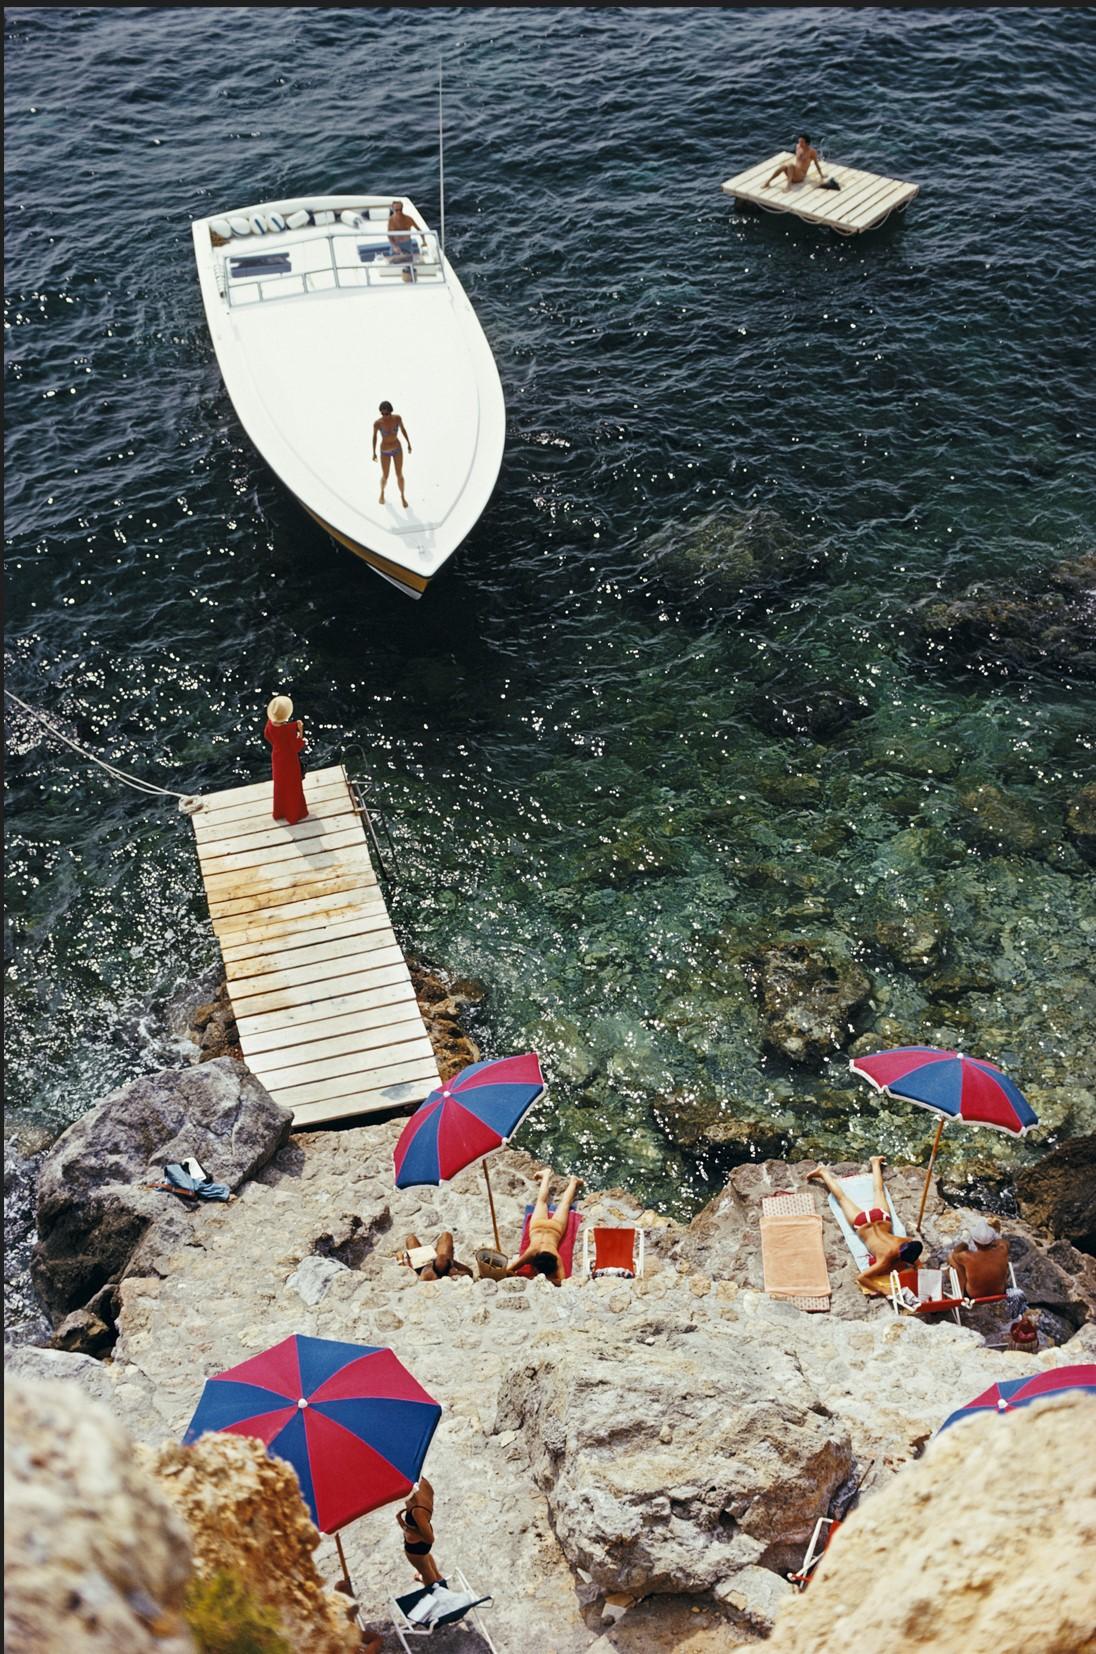 For a limited time only these Slim Aarons prints are available to purchase at 15% discount. Please contact the gallery for any queries.

Please bear in mind that all prints are produced to order. Lead times are expected between 15-20 days.
Currency